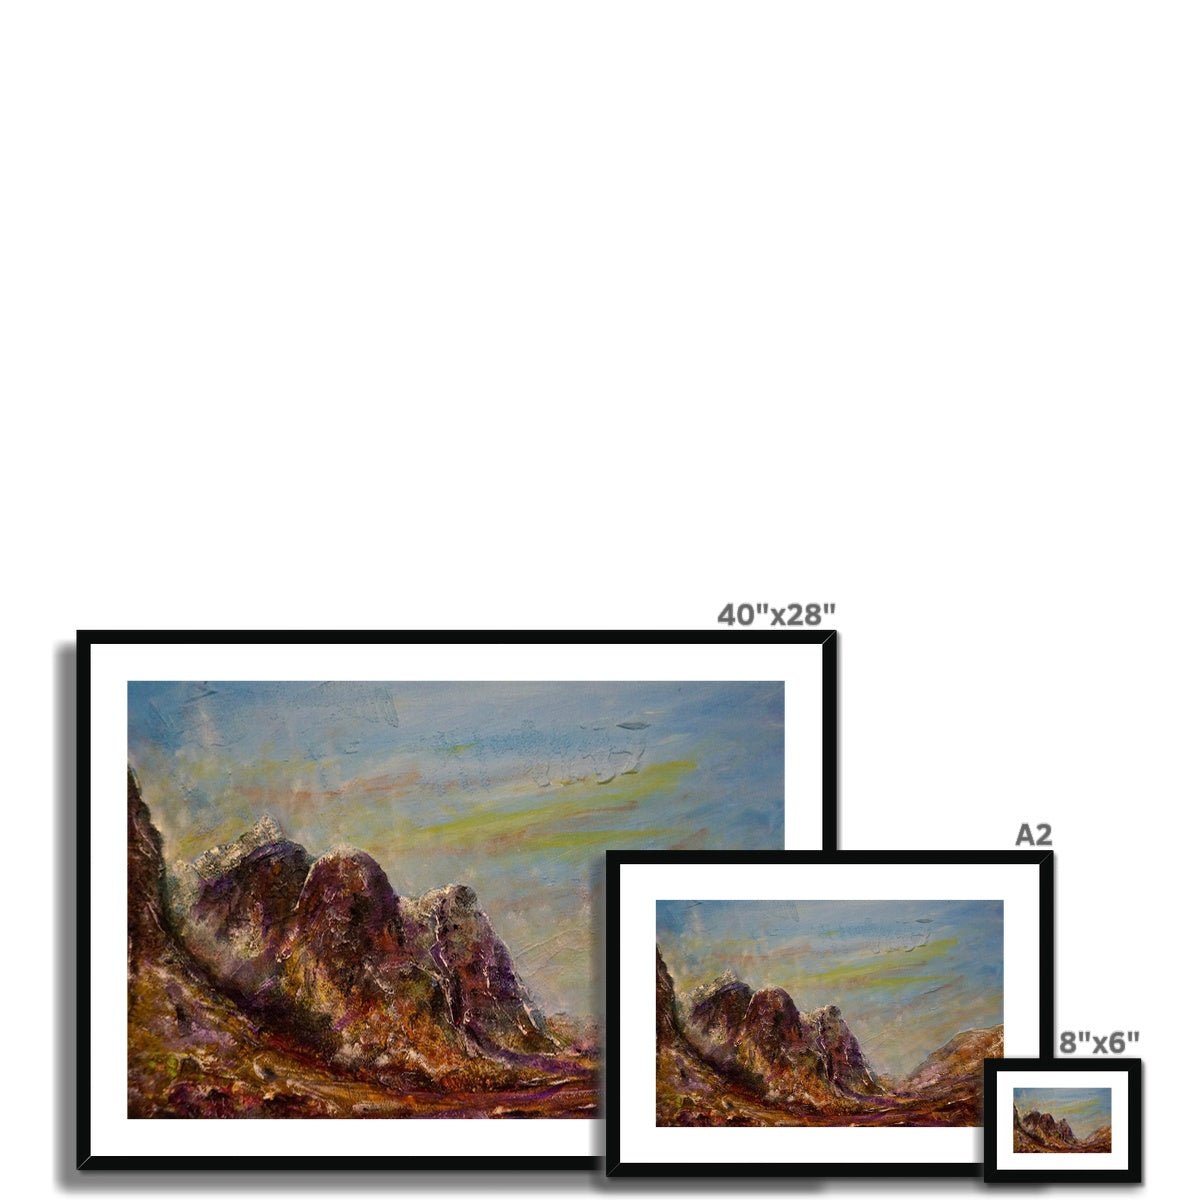 Three Sisters Glencoe Painting | Framed & Mounted Prints From Scotland-Framed & Mounted Prints-Glencoe Art Gallery-Paintings, Prints, Homeware, Art Gifts From Scotland By Scottish Artist Kevin Hunter